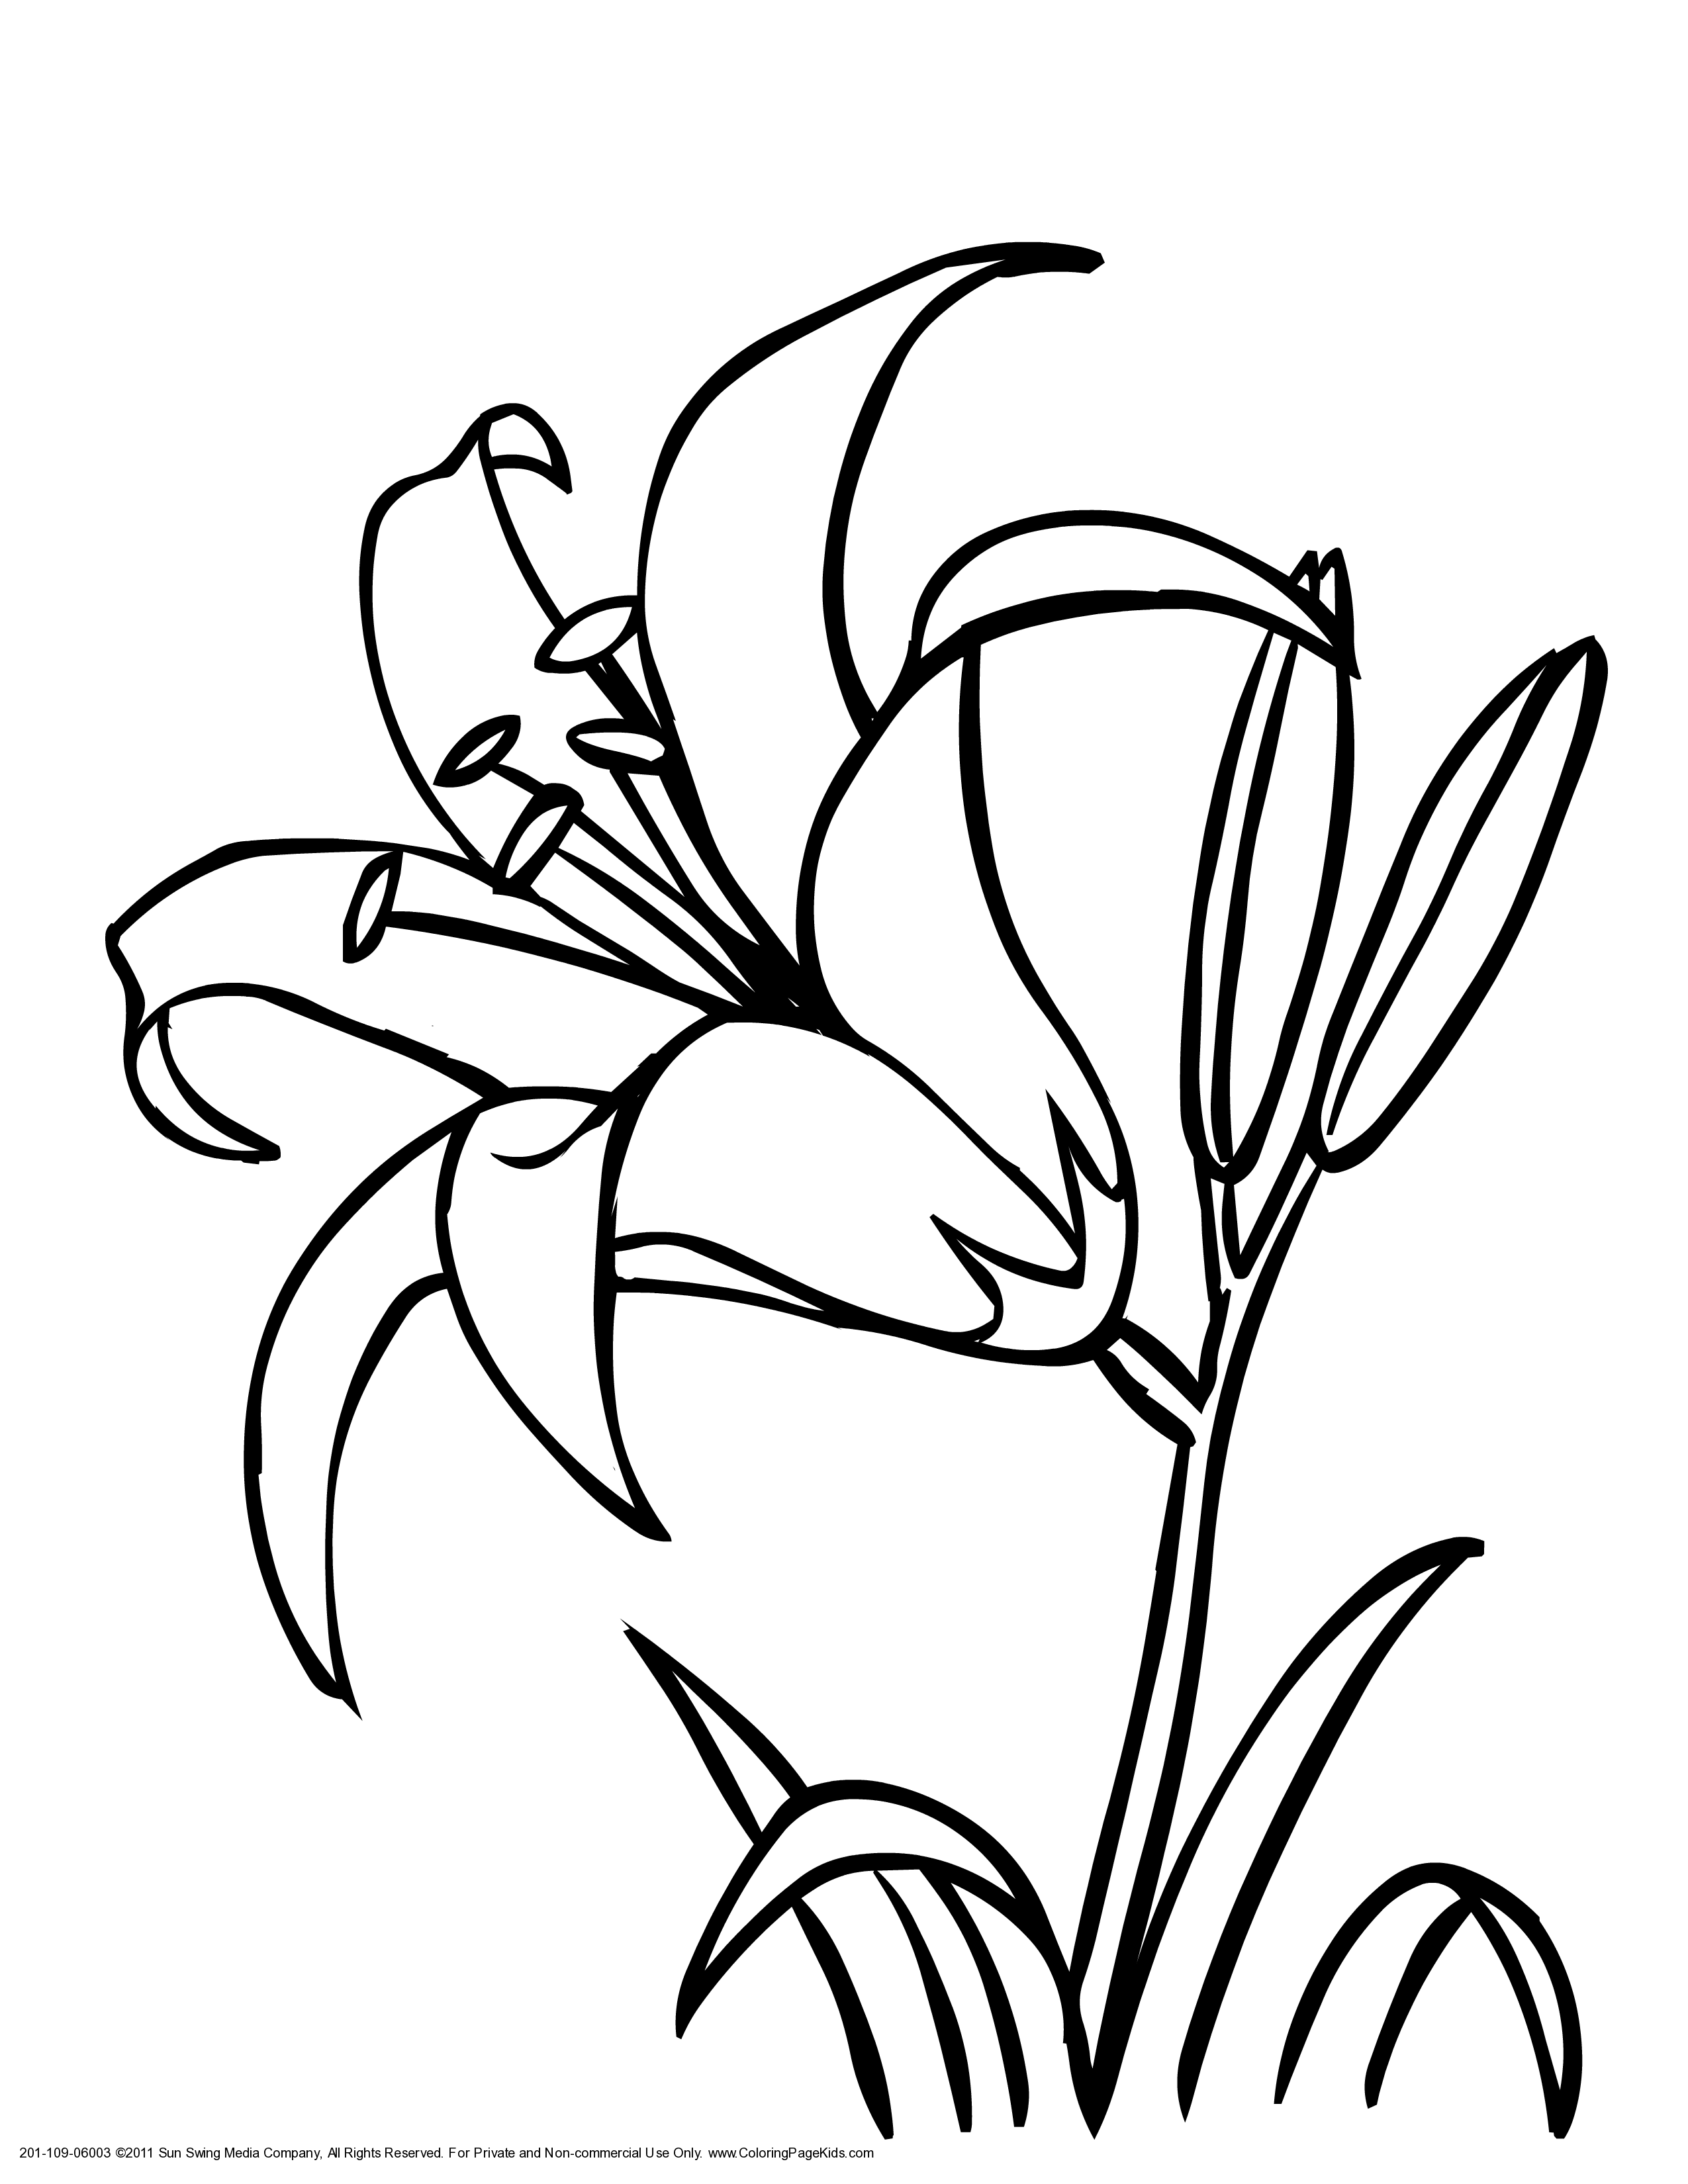 lily clipart lily outline